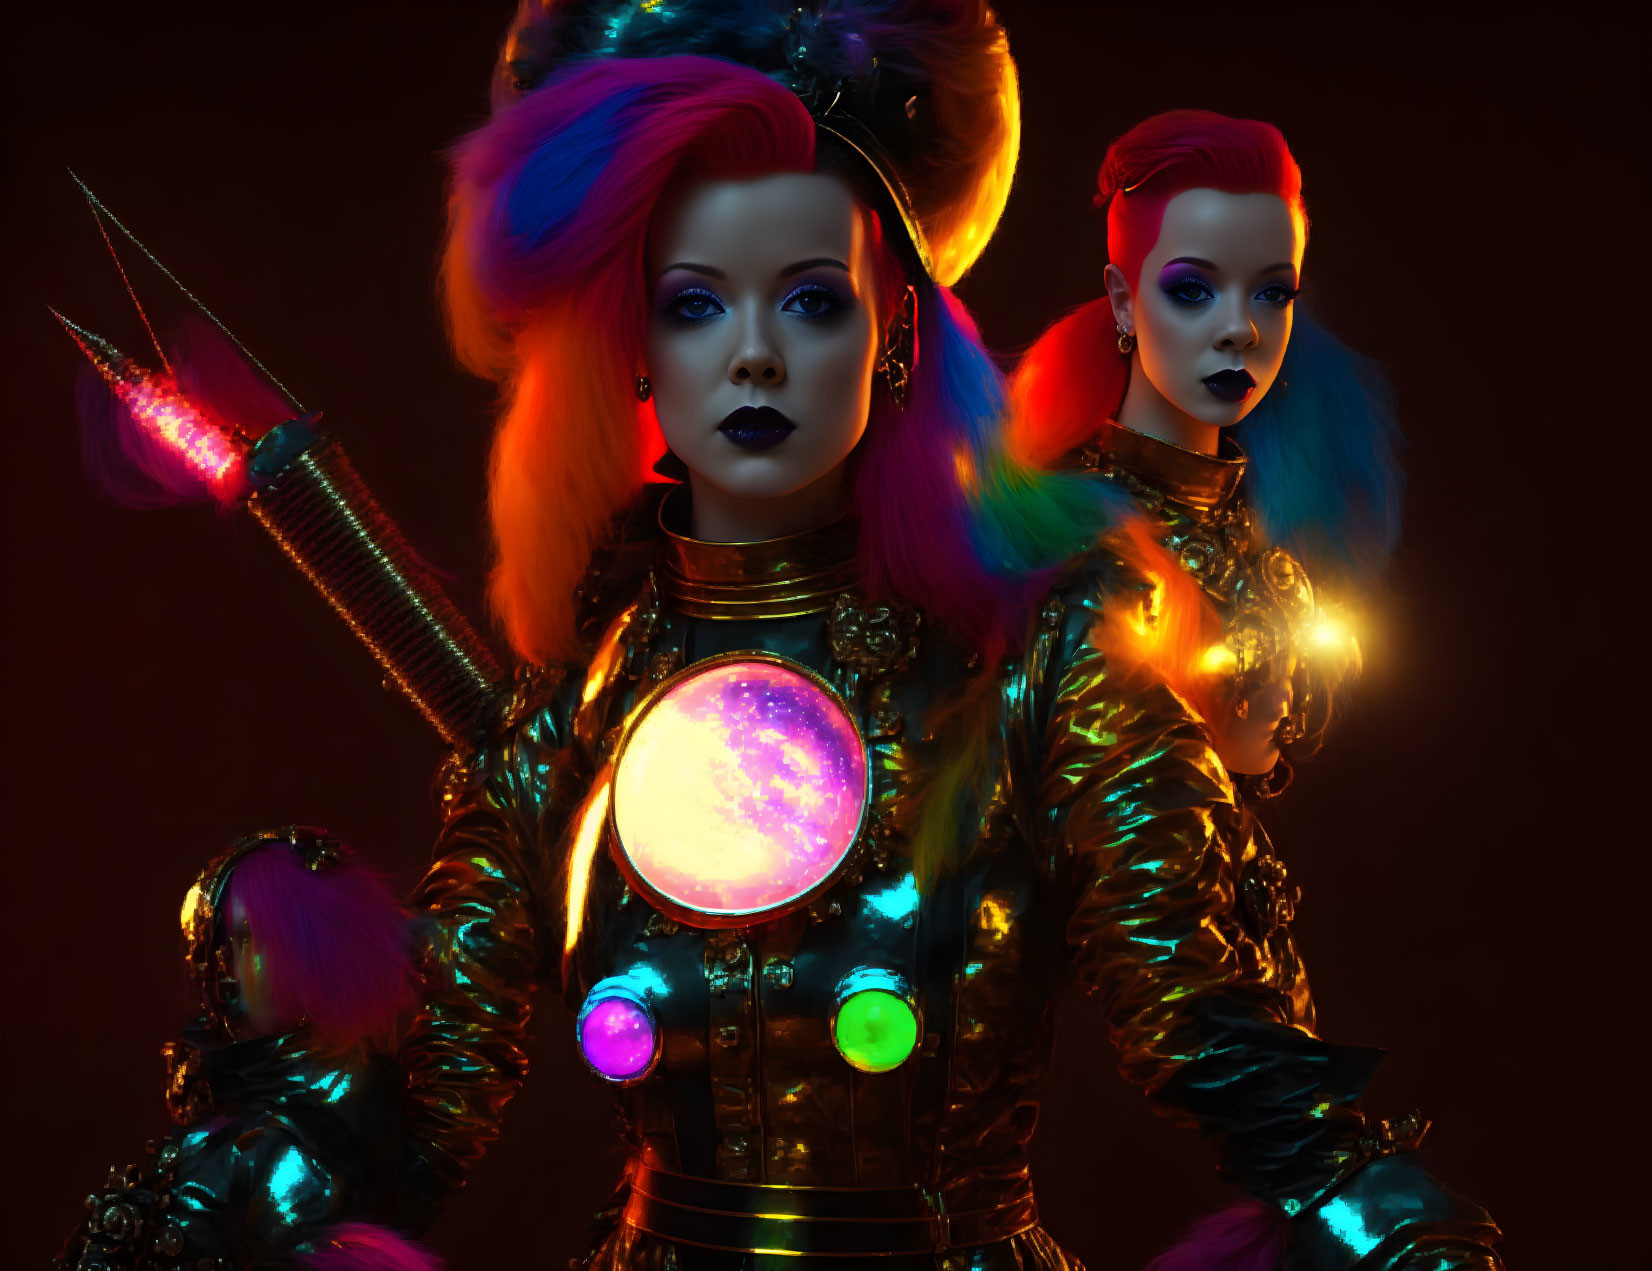 Futuristic women in vibrant hair and sci-fi armor under colorful lights